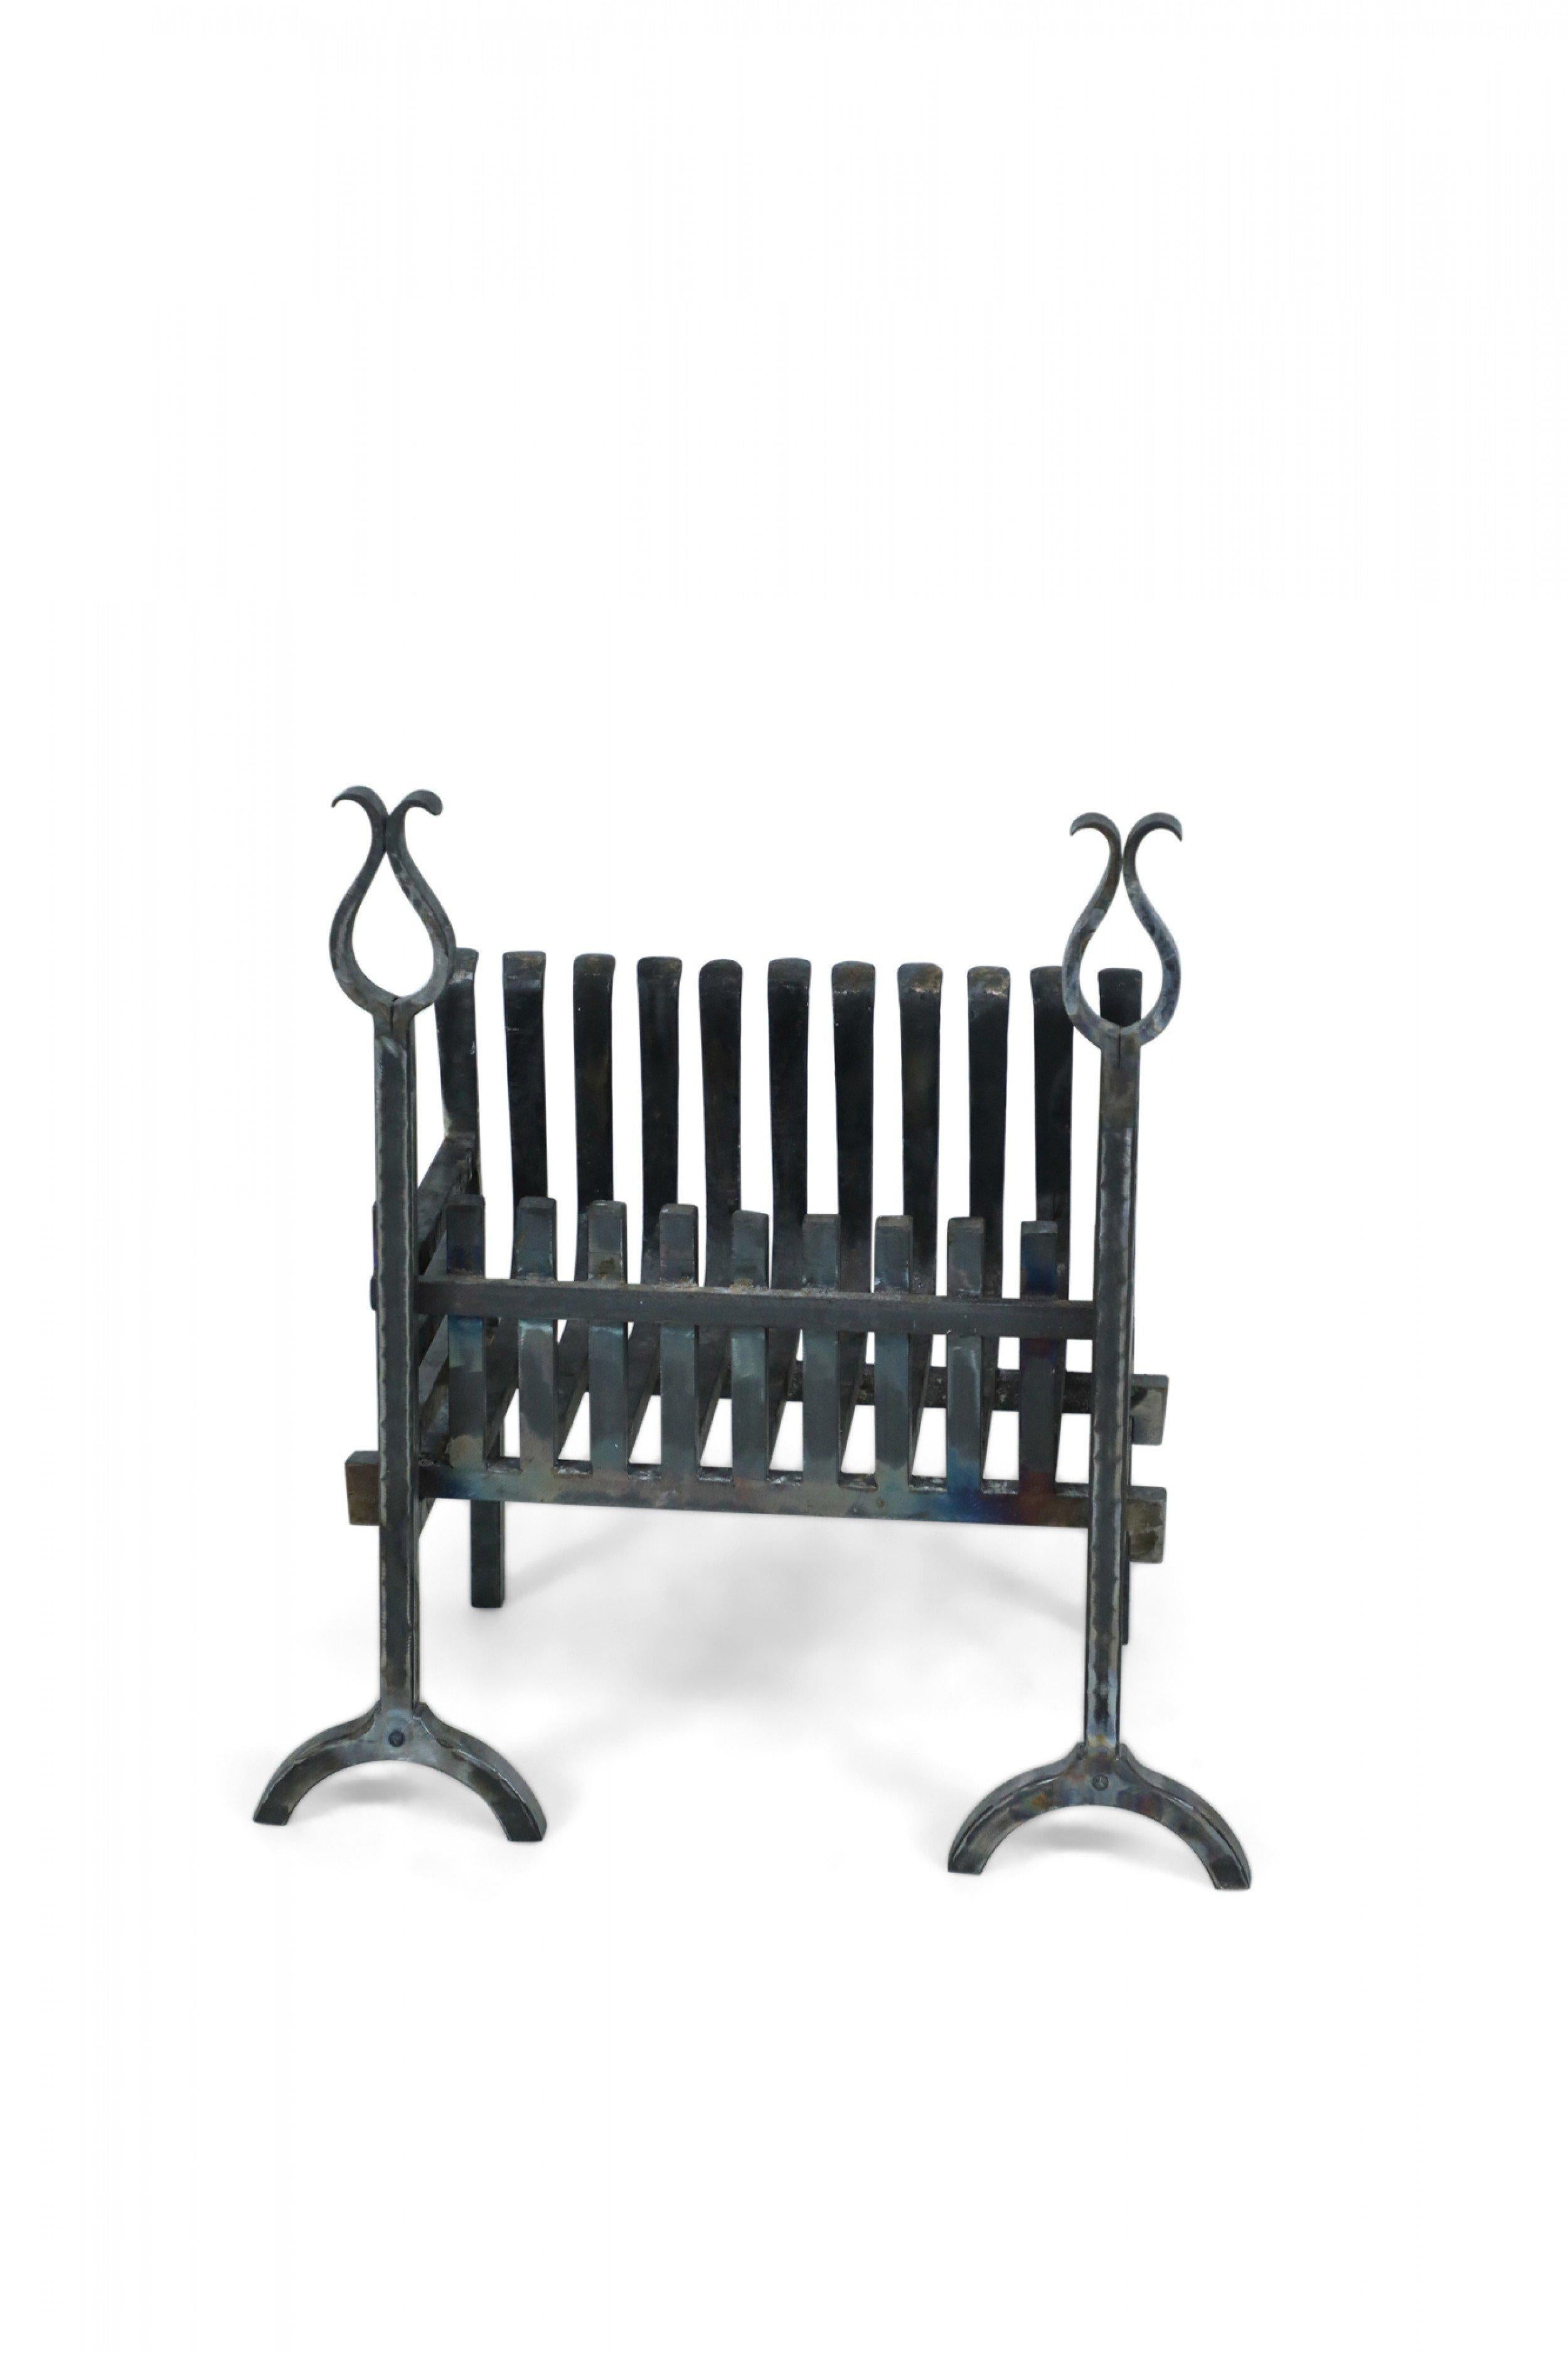 American Art Deco Iron Fire Grate with Andirons For Sale 5